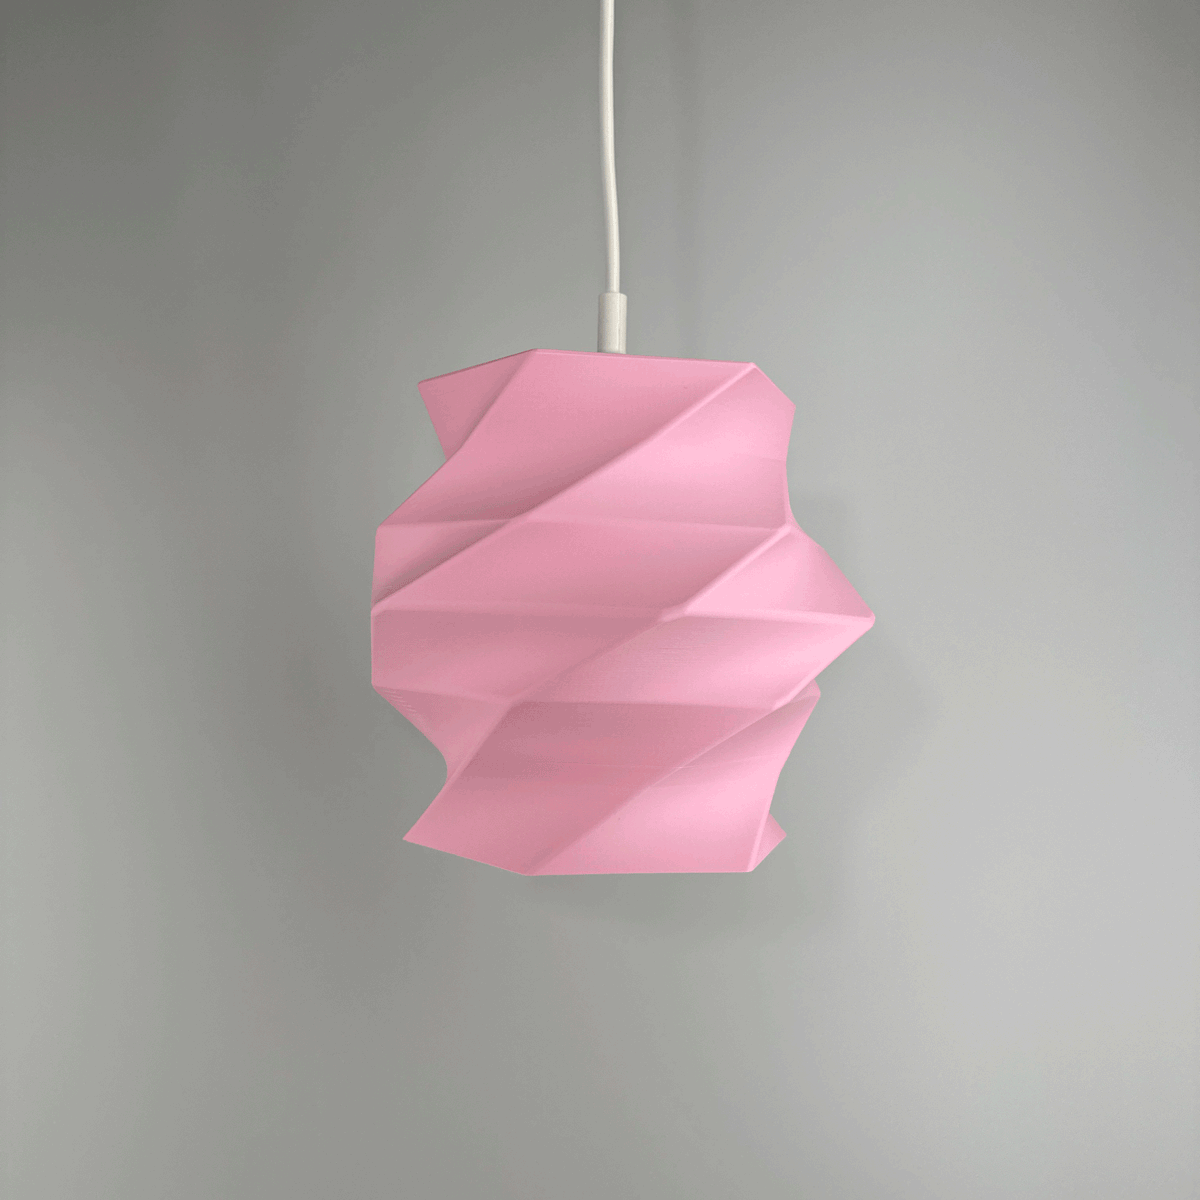 The Flowing Lampshade